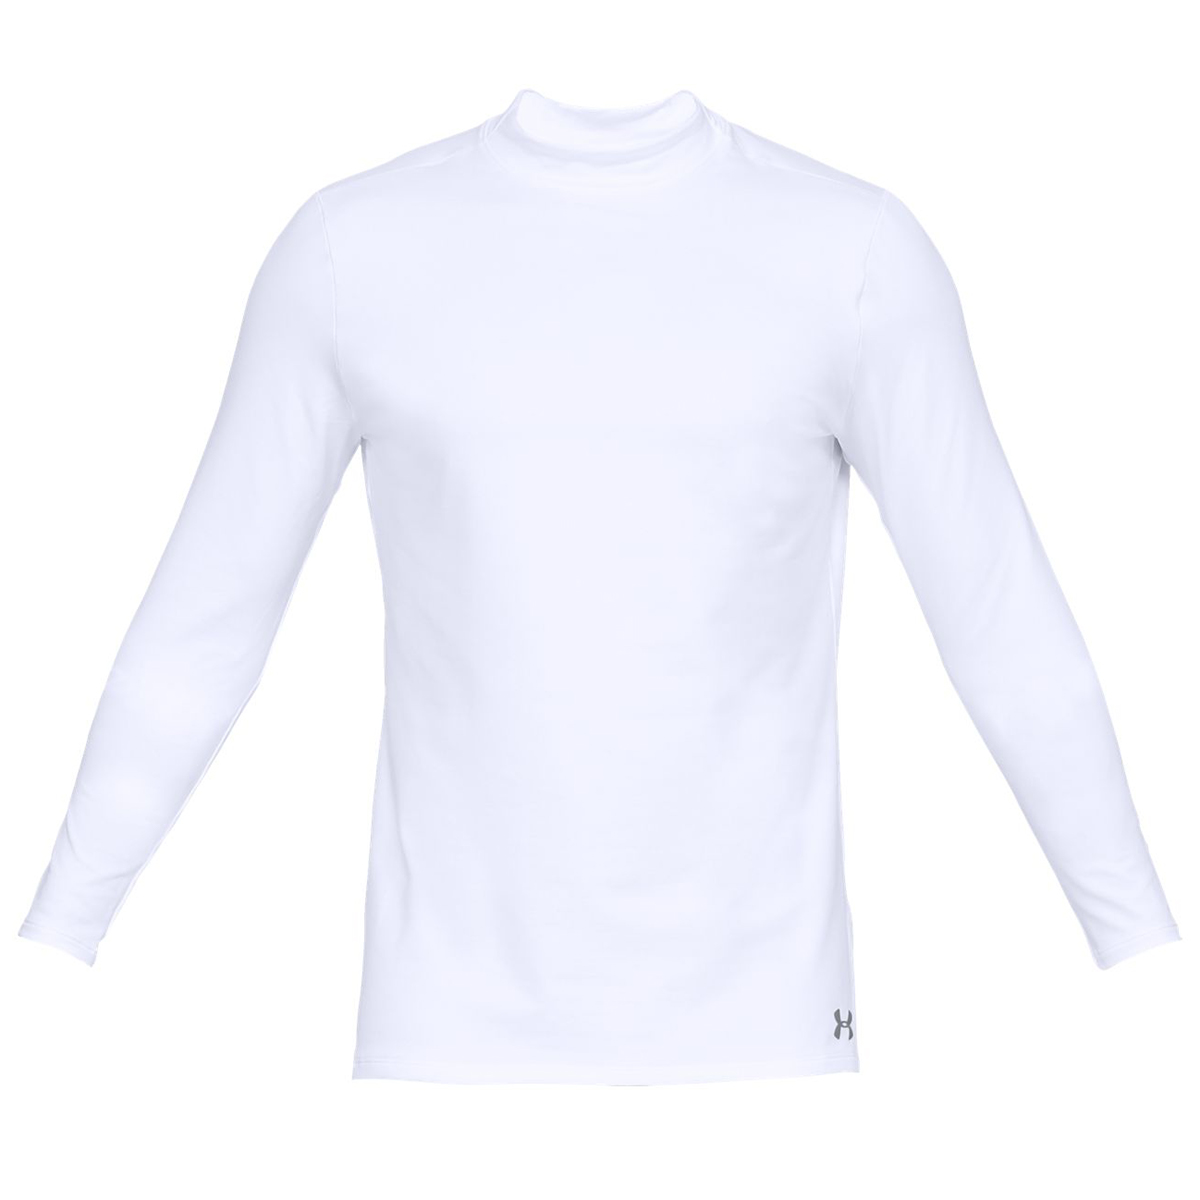 Under Armour Men's Coldgear Armour Fitted Mock Shirt